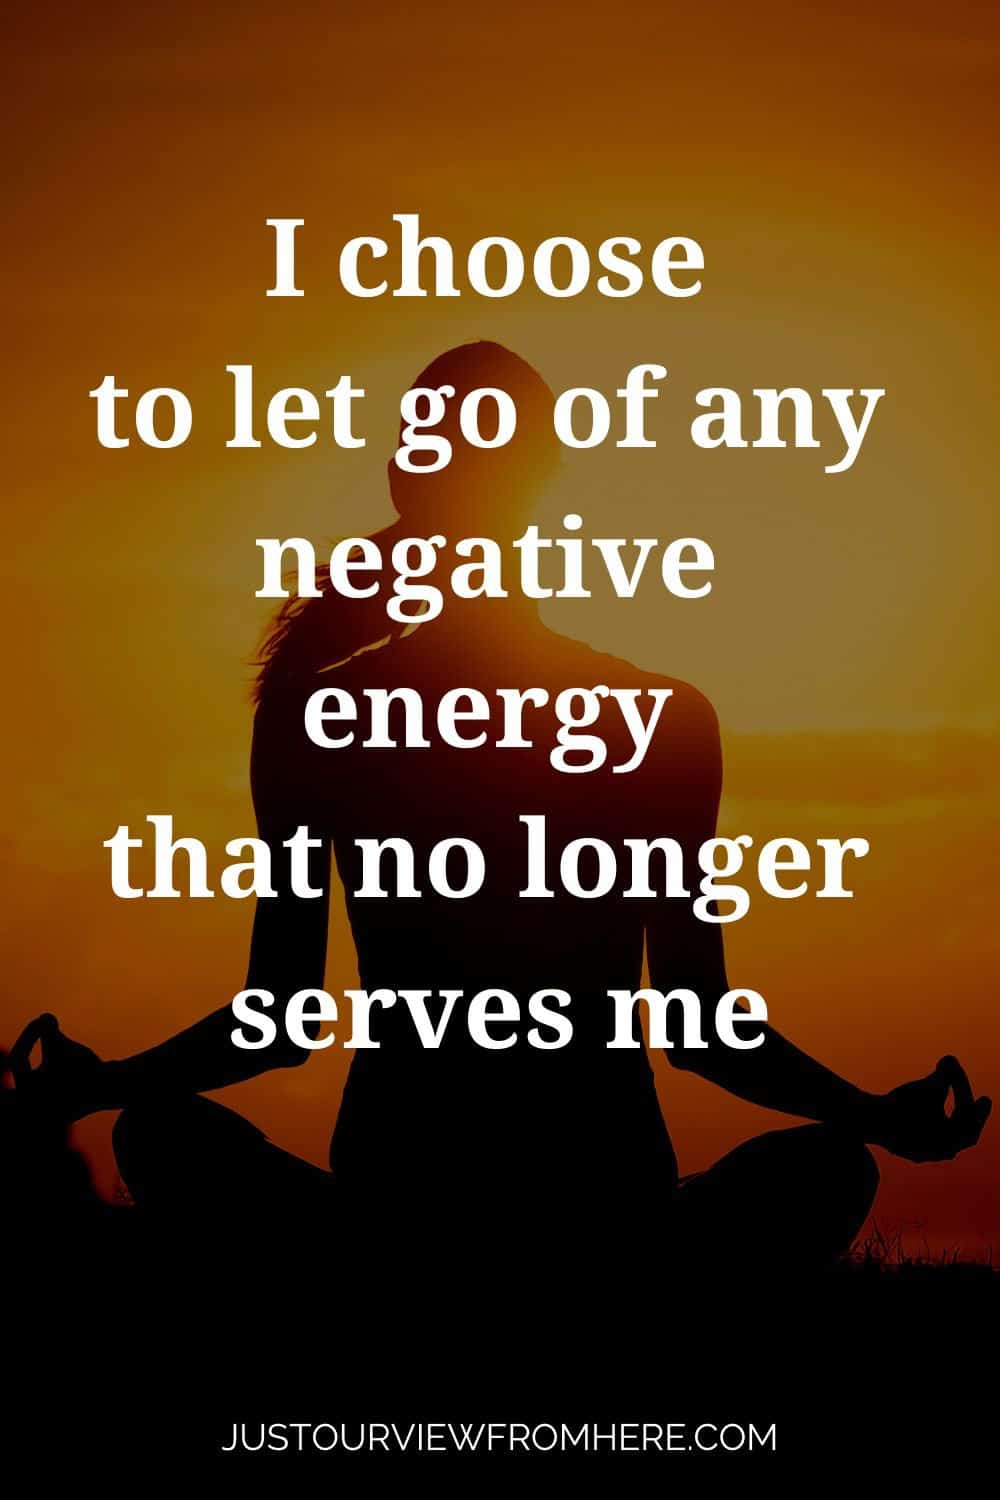 AFFIRMATIONS FOR SELF-LOVE, silhouette OF WOMAN IN LOTUS POSITION WITH SUNSET IN BACKGROUND, TEXT OVERLAY I CHOOSE TO LET GO OF ANY NEGATIVE ENERGY THAT NO LONGER SERVES ME